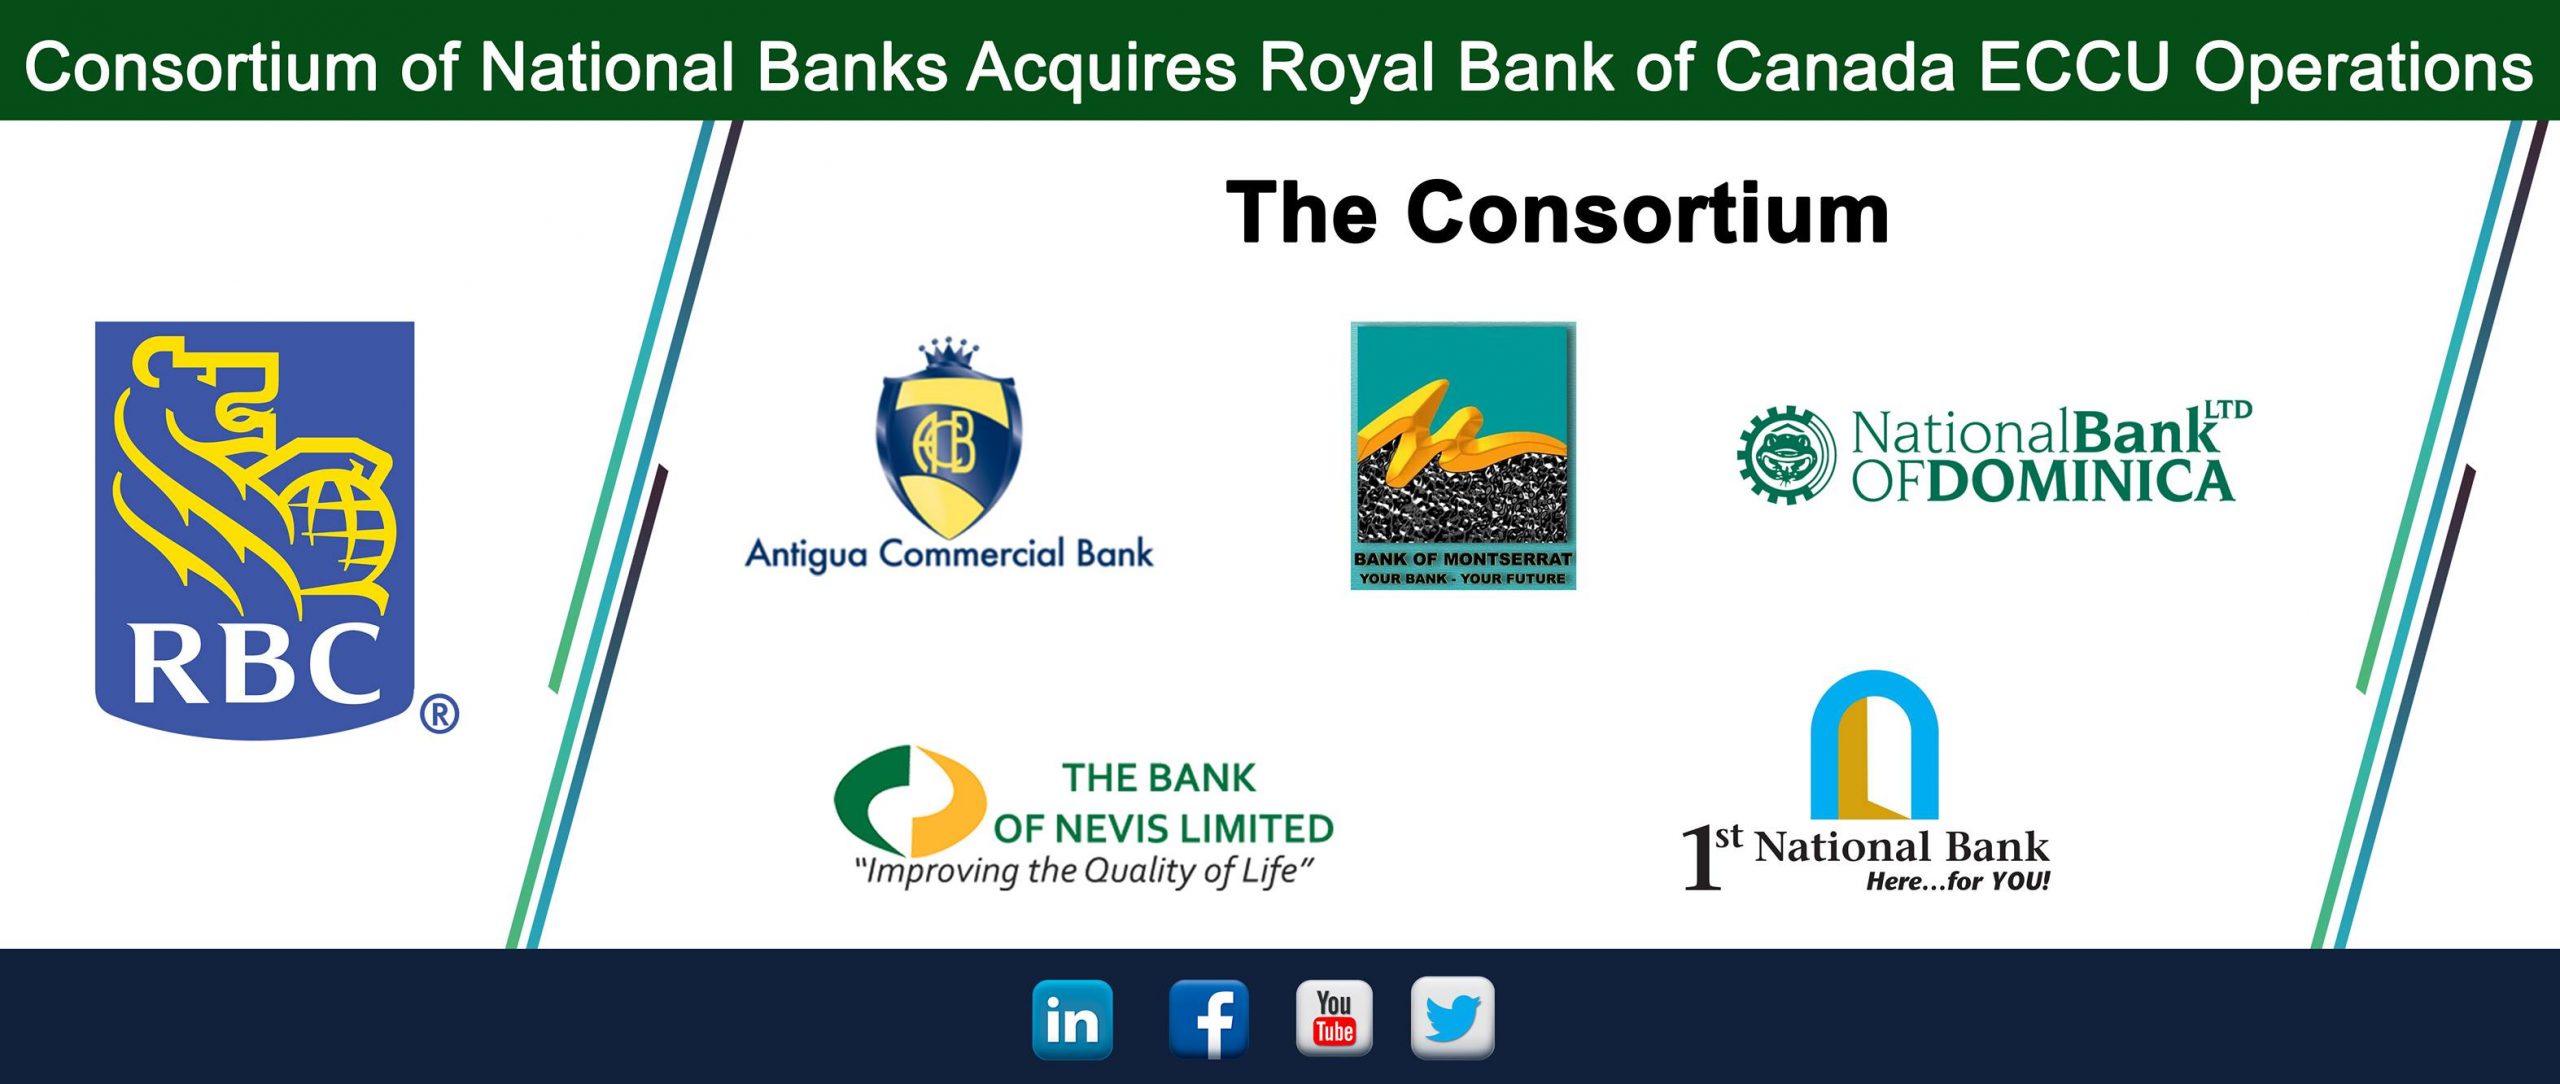 Royal Bank of Canada Operations in the Eastern Caribbean Sold